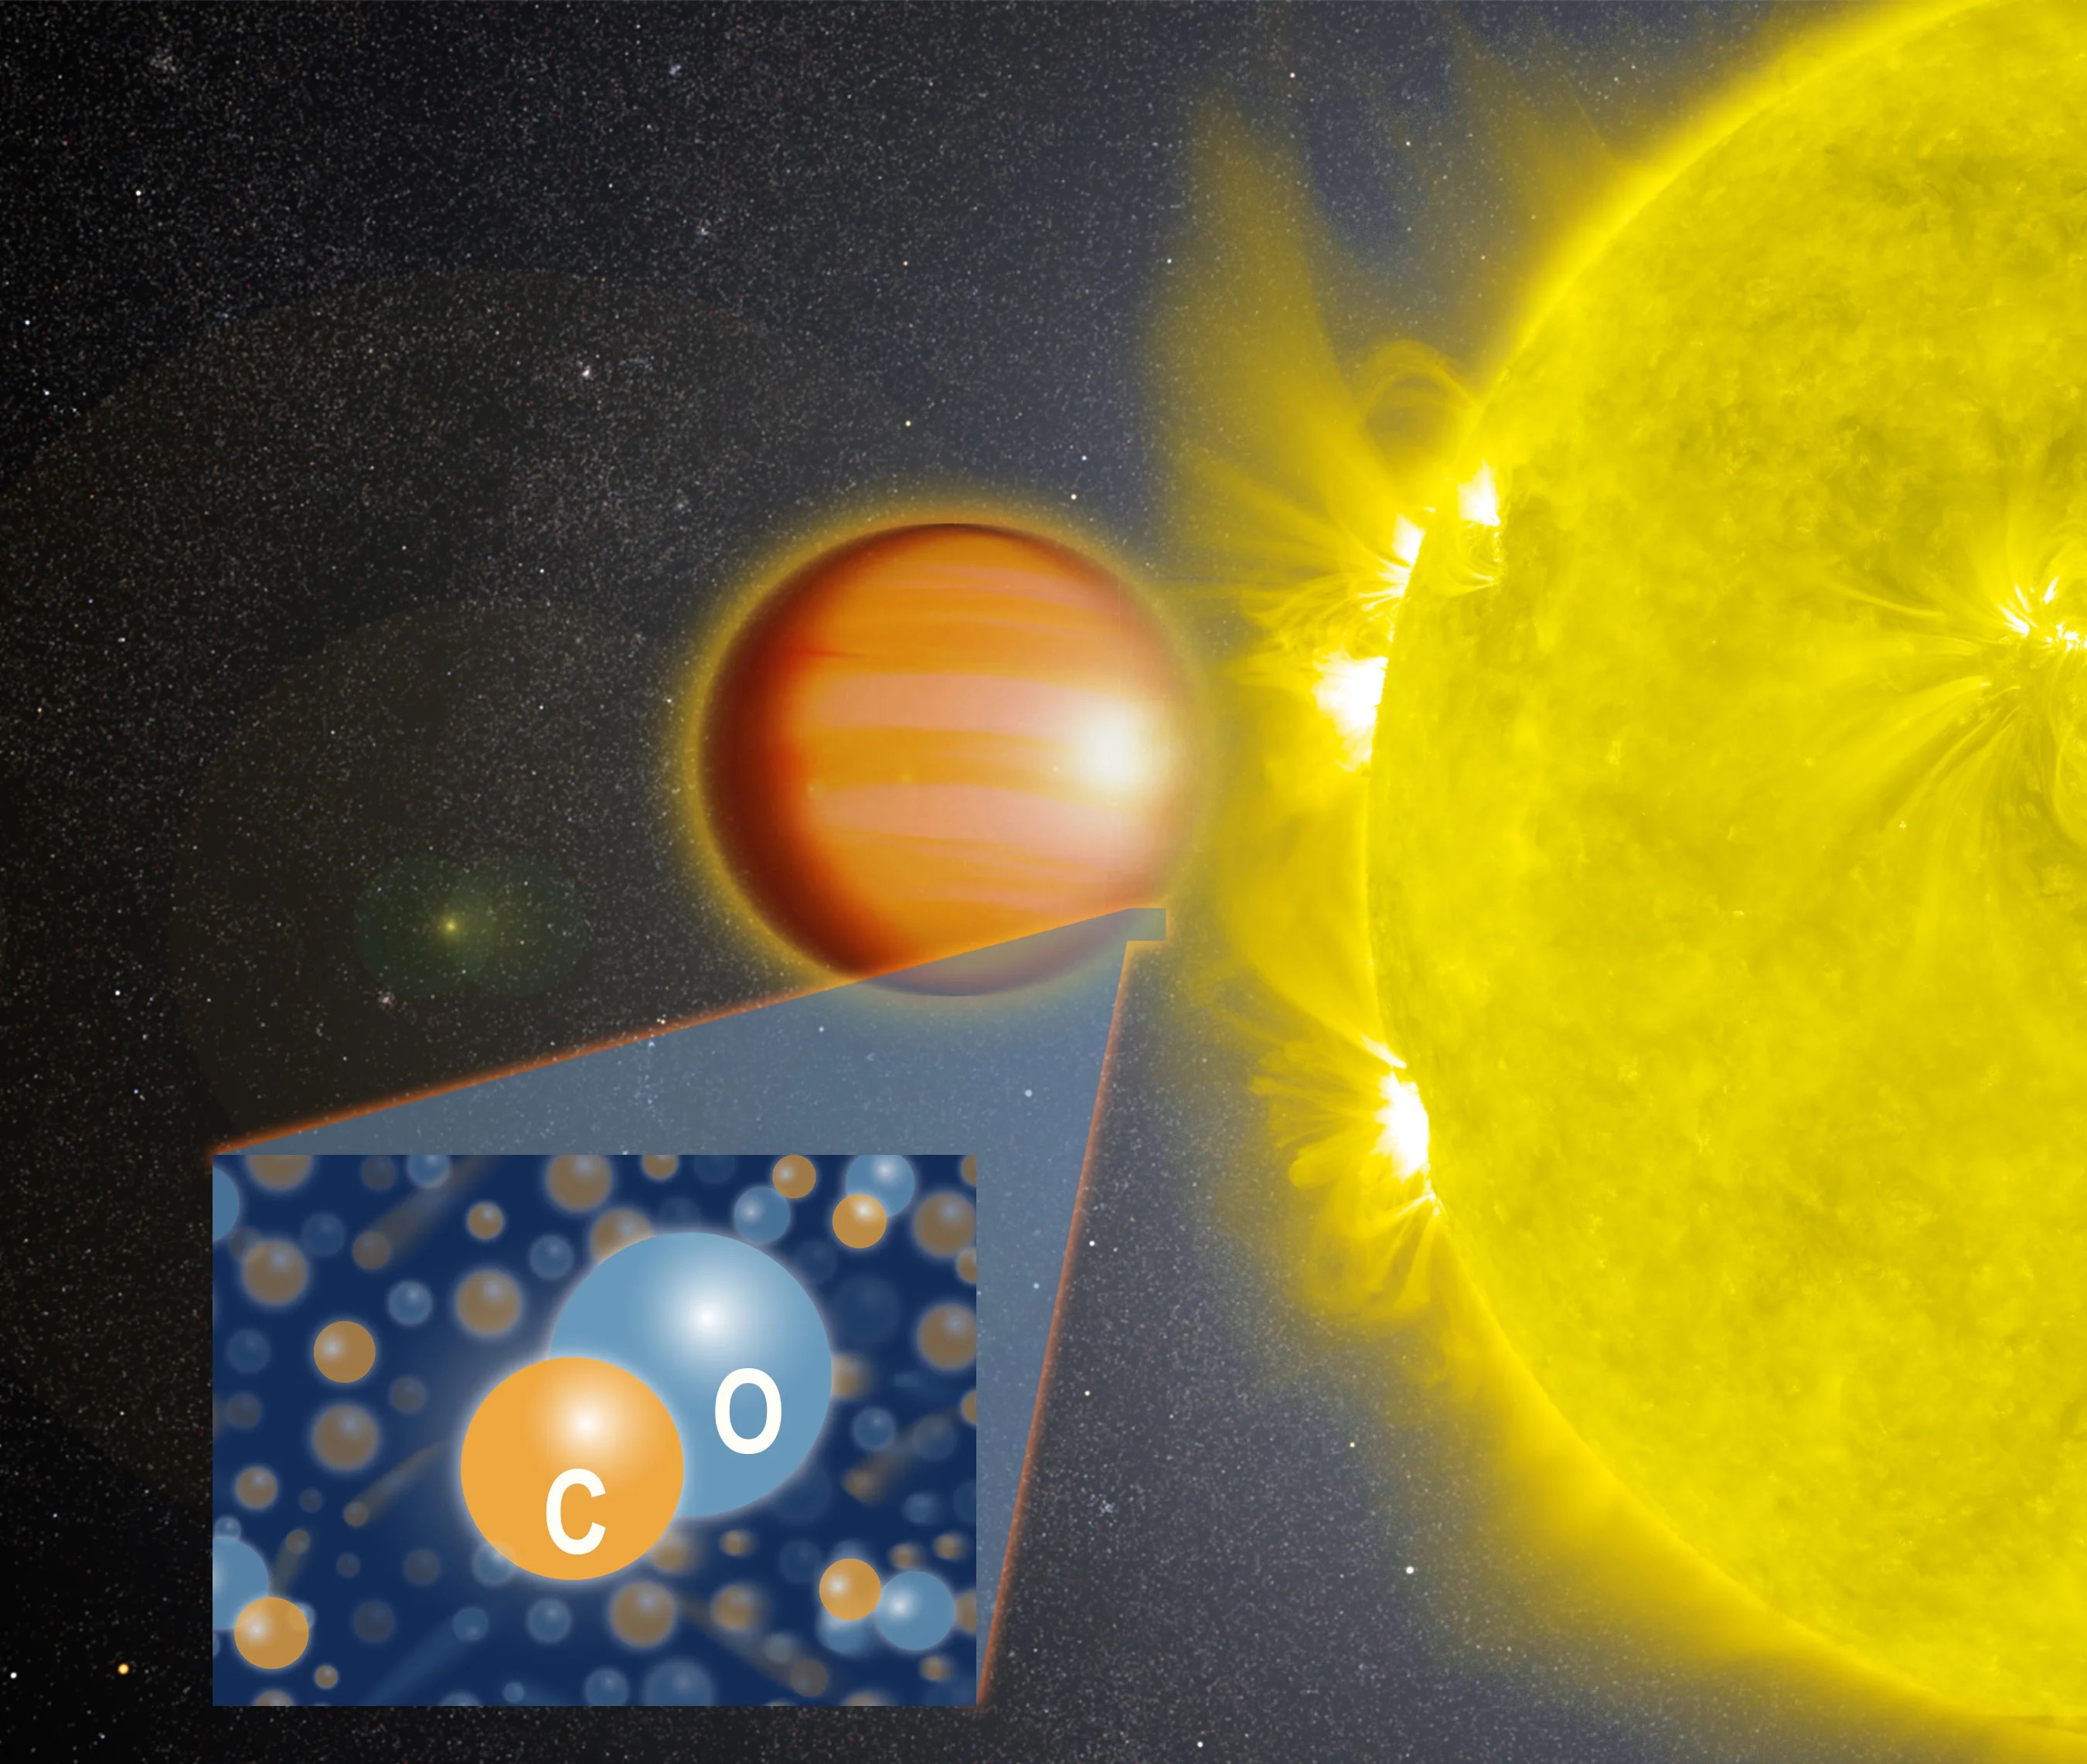 artists rendering of star and planet with inset